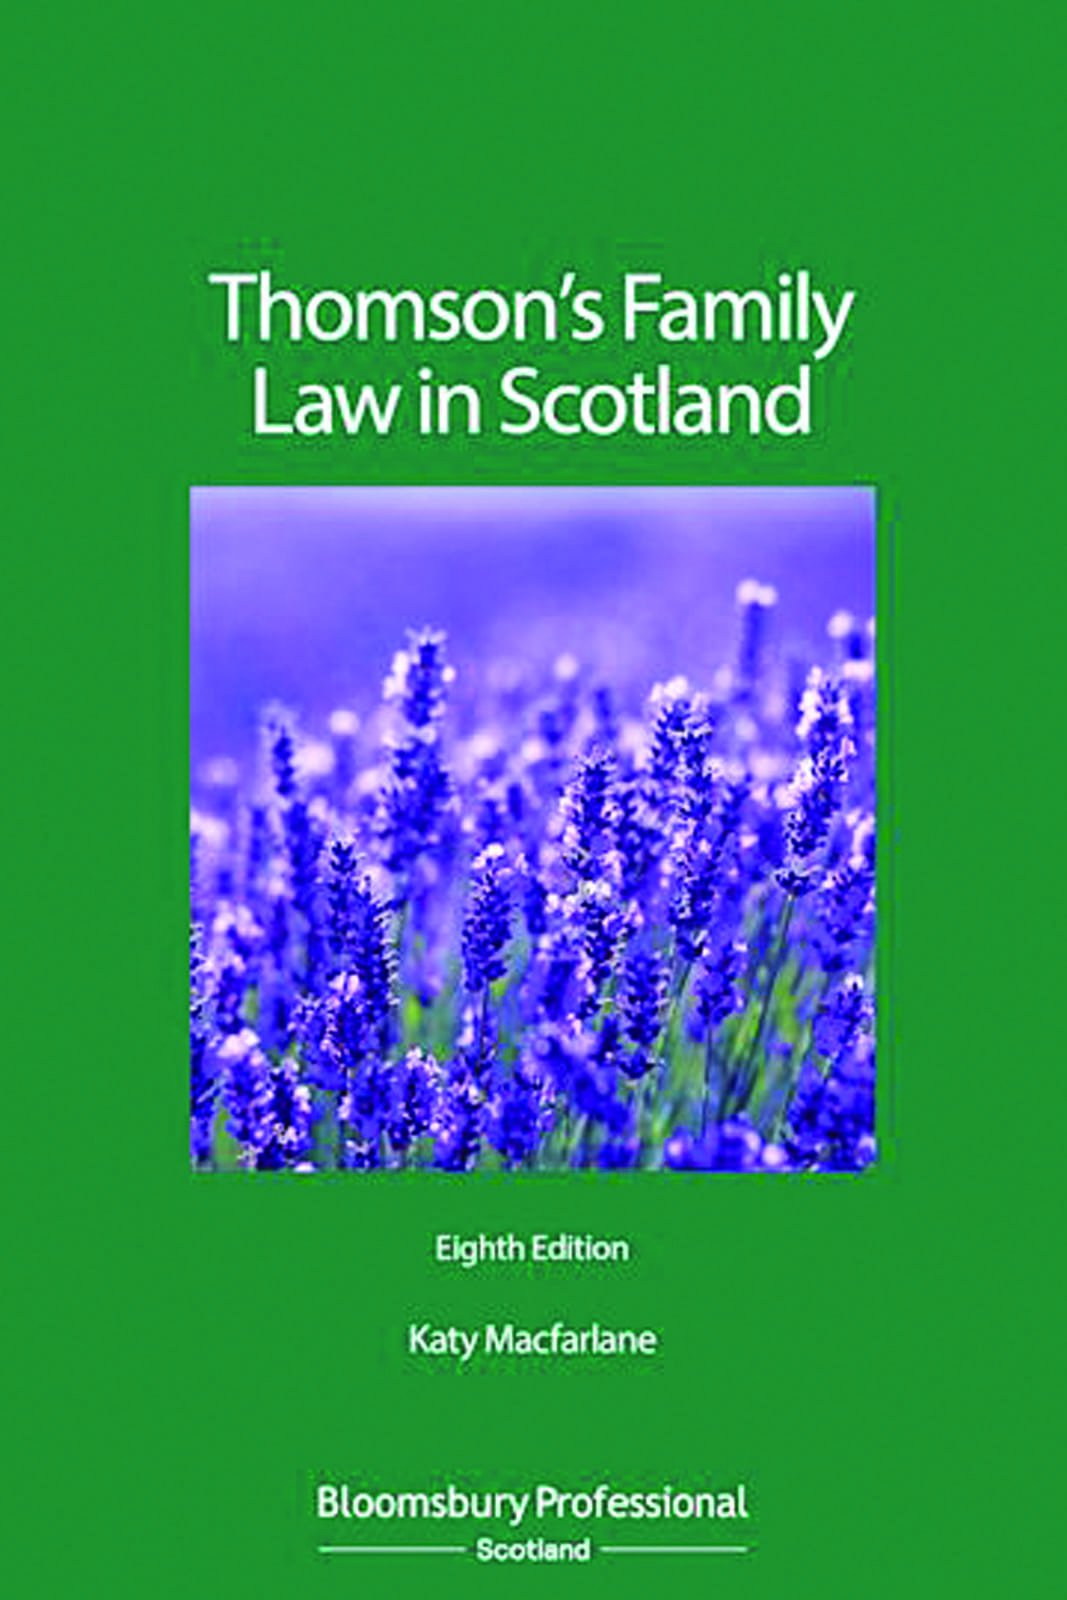 Cover, Thomson's Family Law in Scotland (eighth edition), by Katy MacFarlane